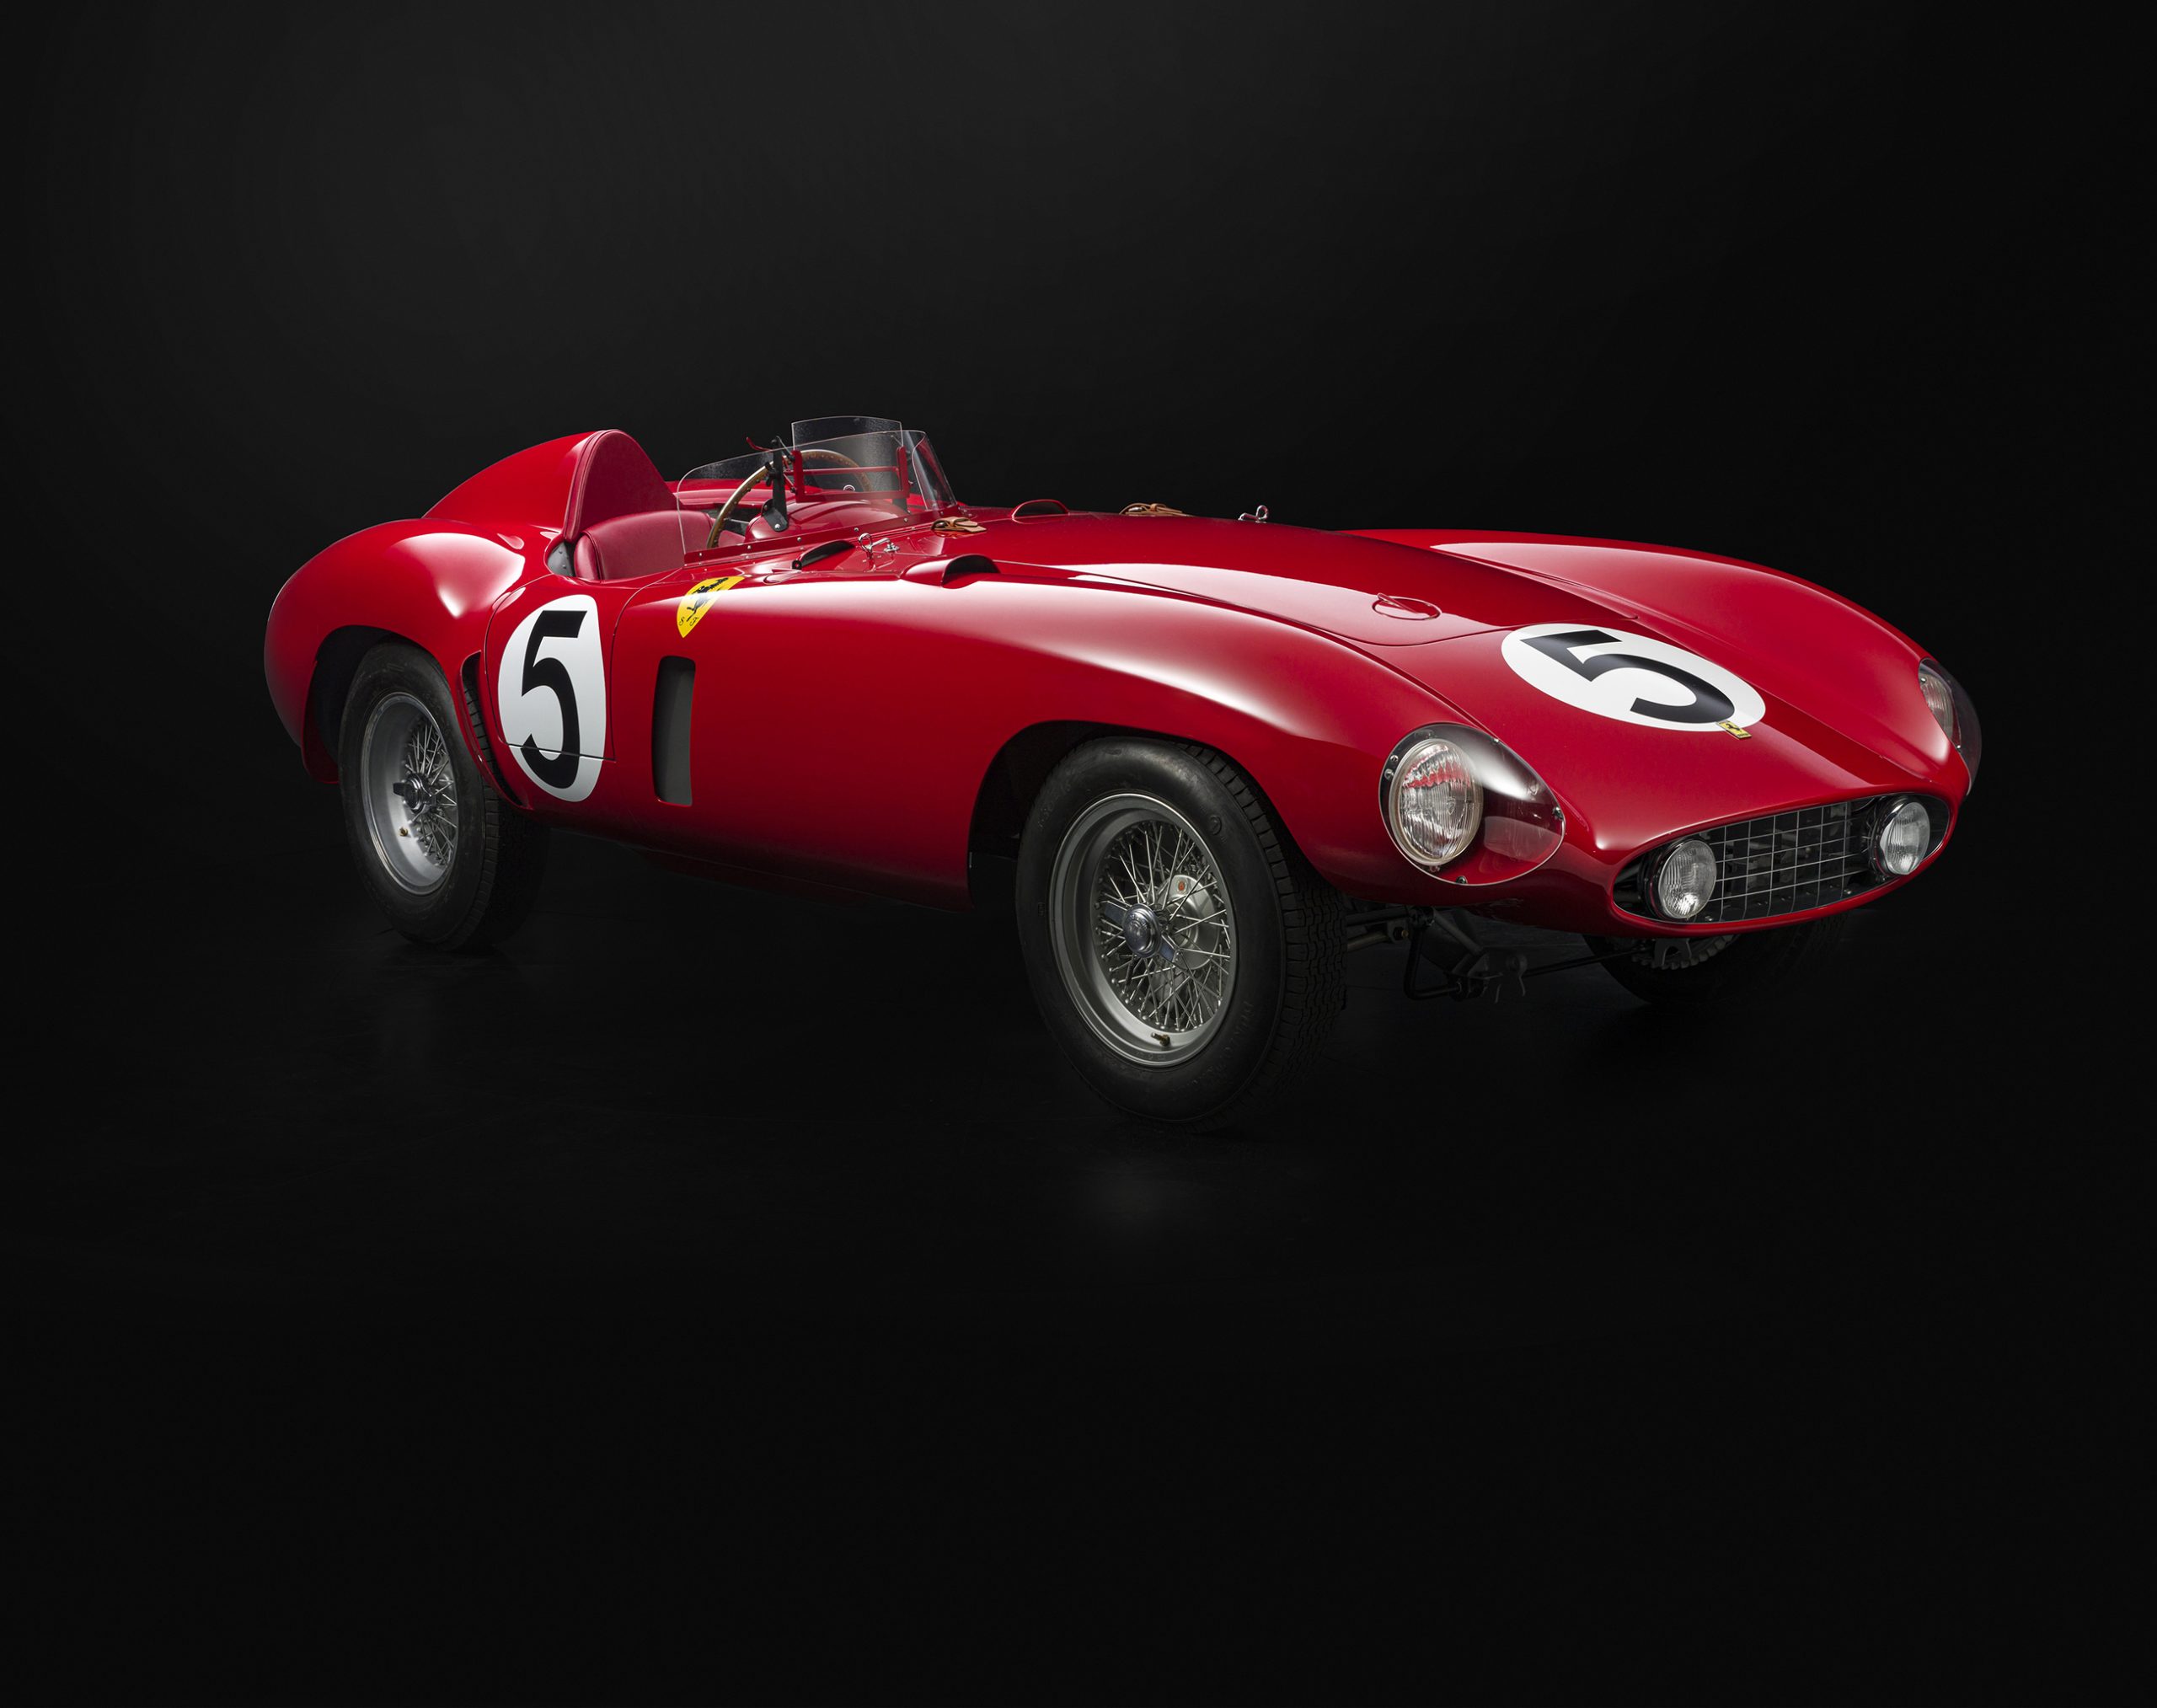 Image of classic red Ferrari on a black background